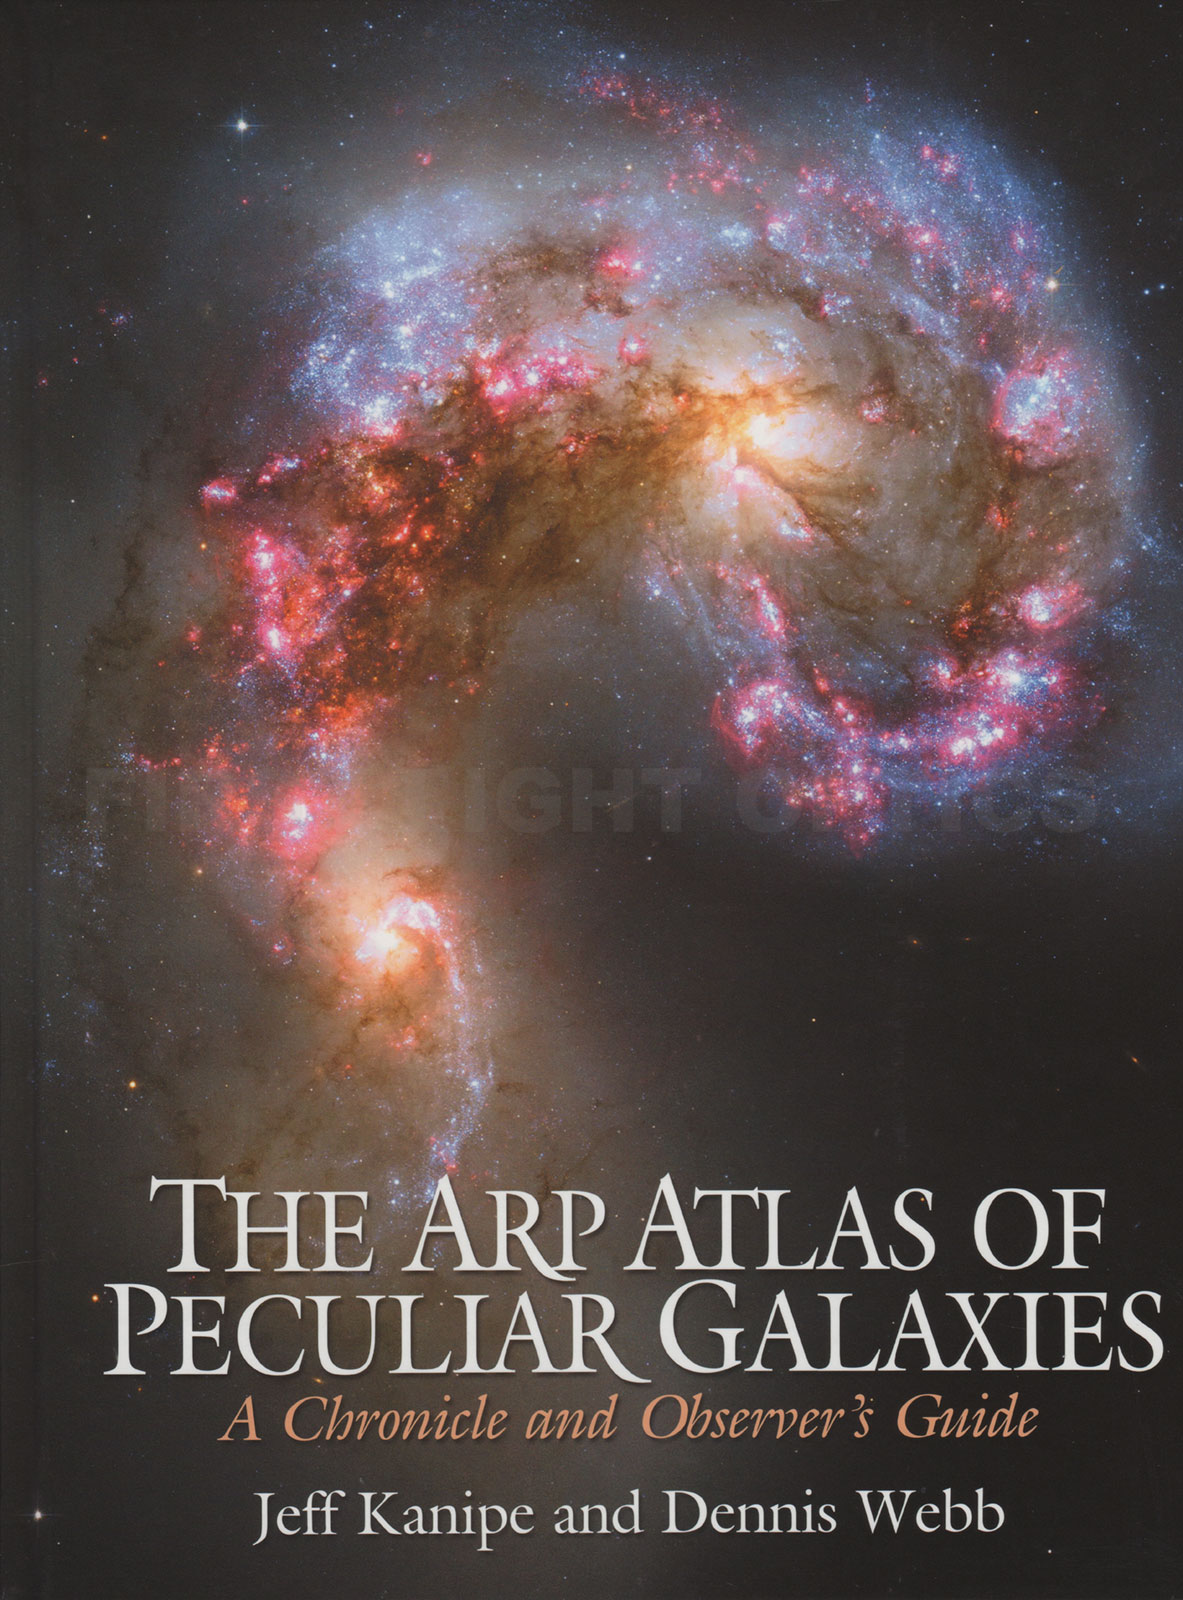 The ARP Atlas of Peculiar Galaxies: A Chronicle and Observer's Guide Book